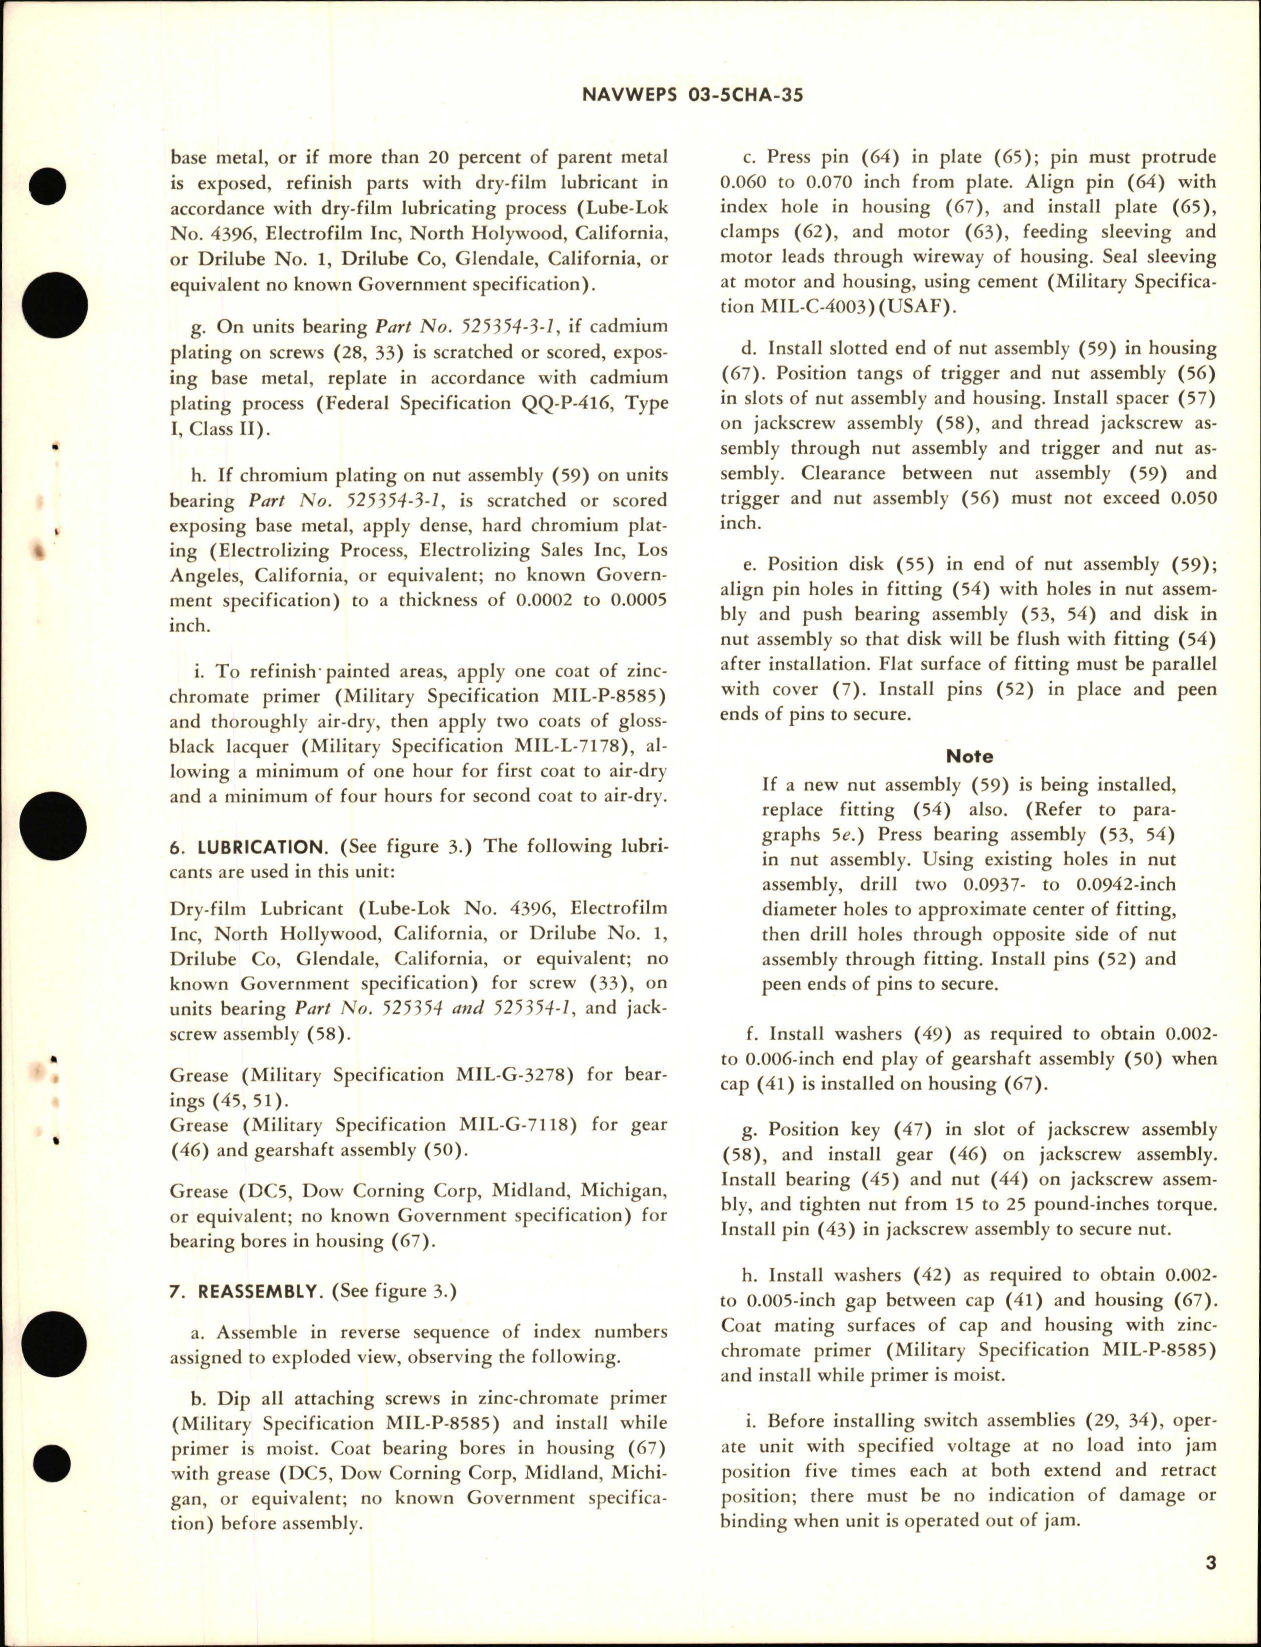 Sample page 5 from AirCorps Library document: Overhaul Instructions with Parts Breakdown for Electromechanical Linear Actuators